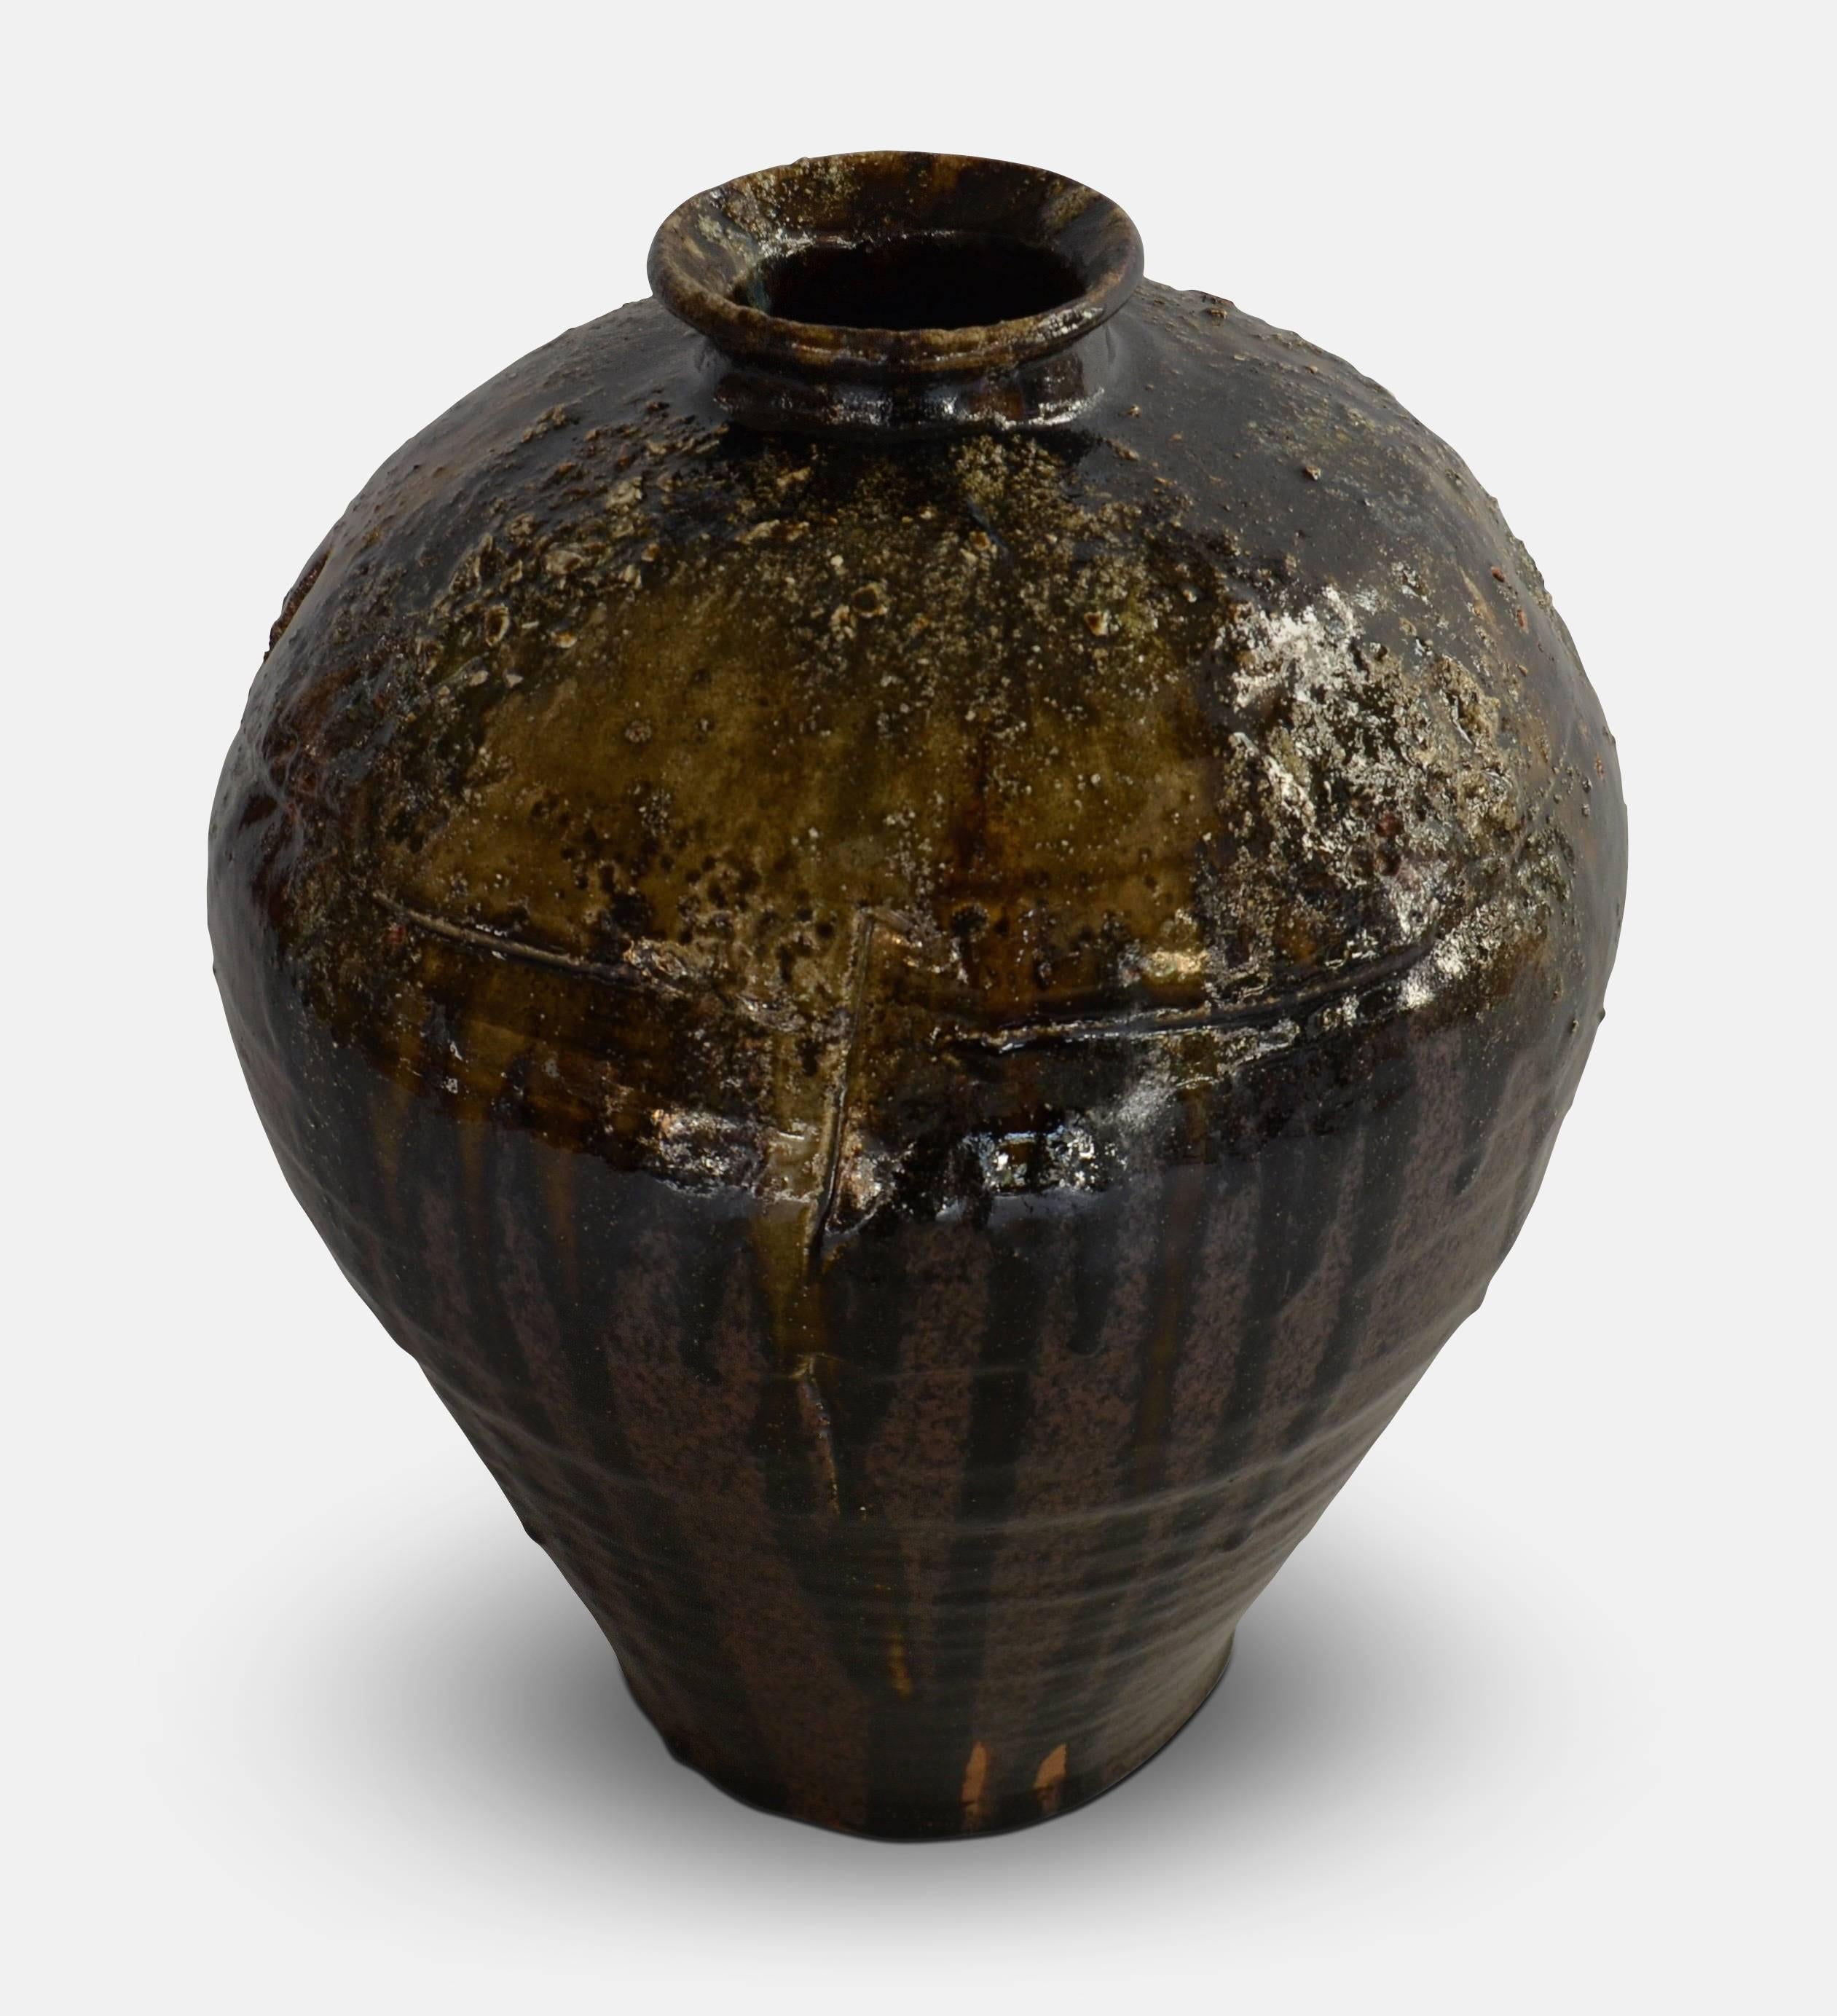 Hans Vangsø, (1950).
Floor vase with brown glaze mixed with seaweed. 
Educated at Academy of Fine Arts, Aarhus. Lives and works in Knebel, Denmark. Represented at The National Art Foundation of Denmark, The National Swedish Art Foundation,